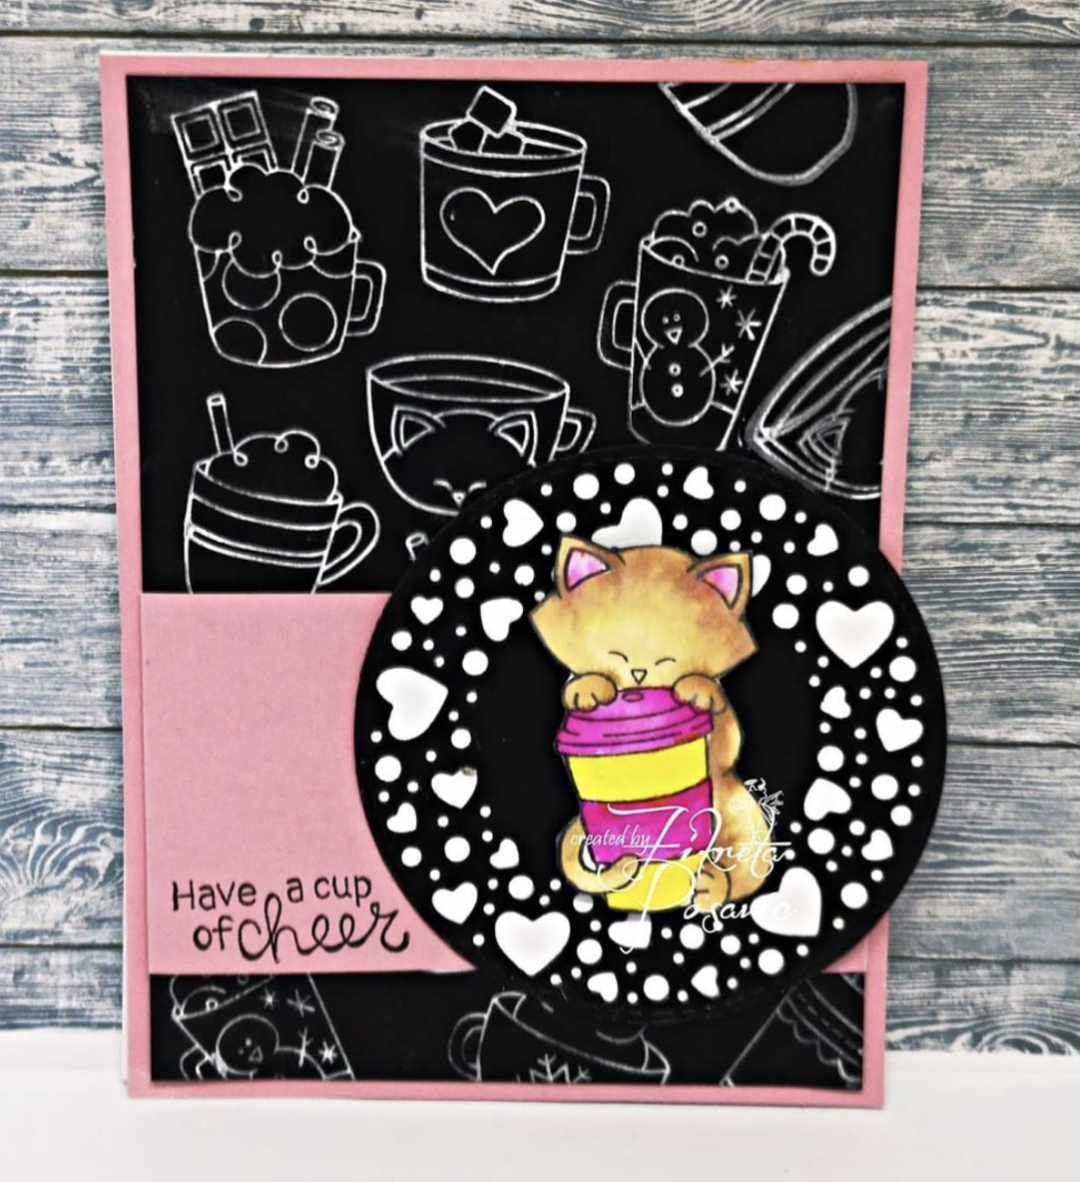 Fan Feature Week - Day 3 | Coffee and Cat Card by Fikreta Posavec using Newton Loves Coffee Stamp Set and Cup of Cocoa Stamp Set by Newton's Nook Designs #newtonsnook #handmade